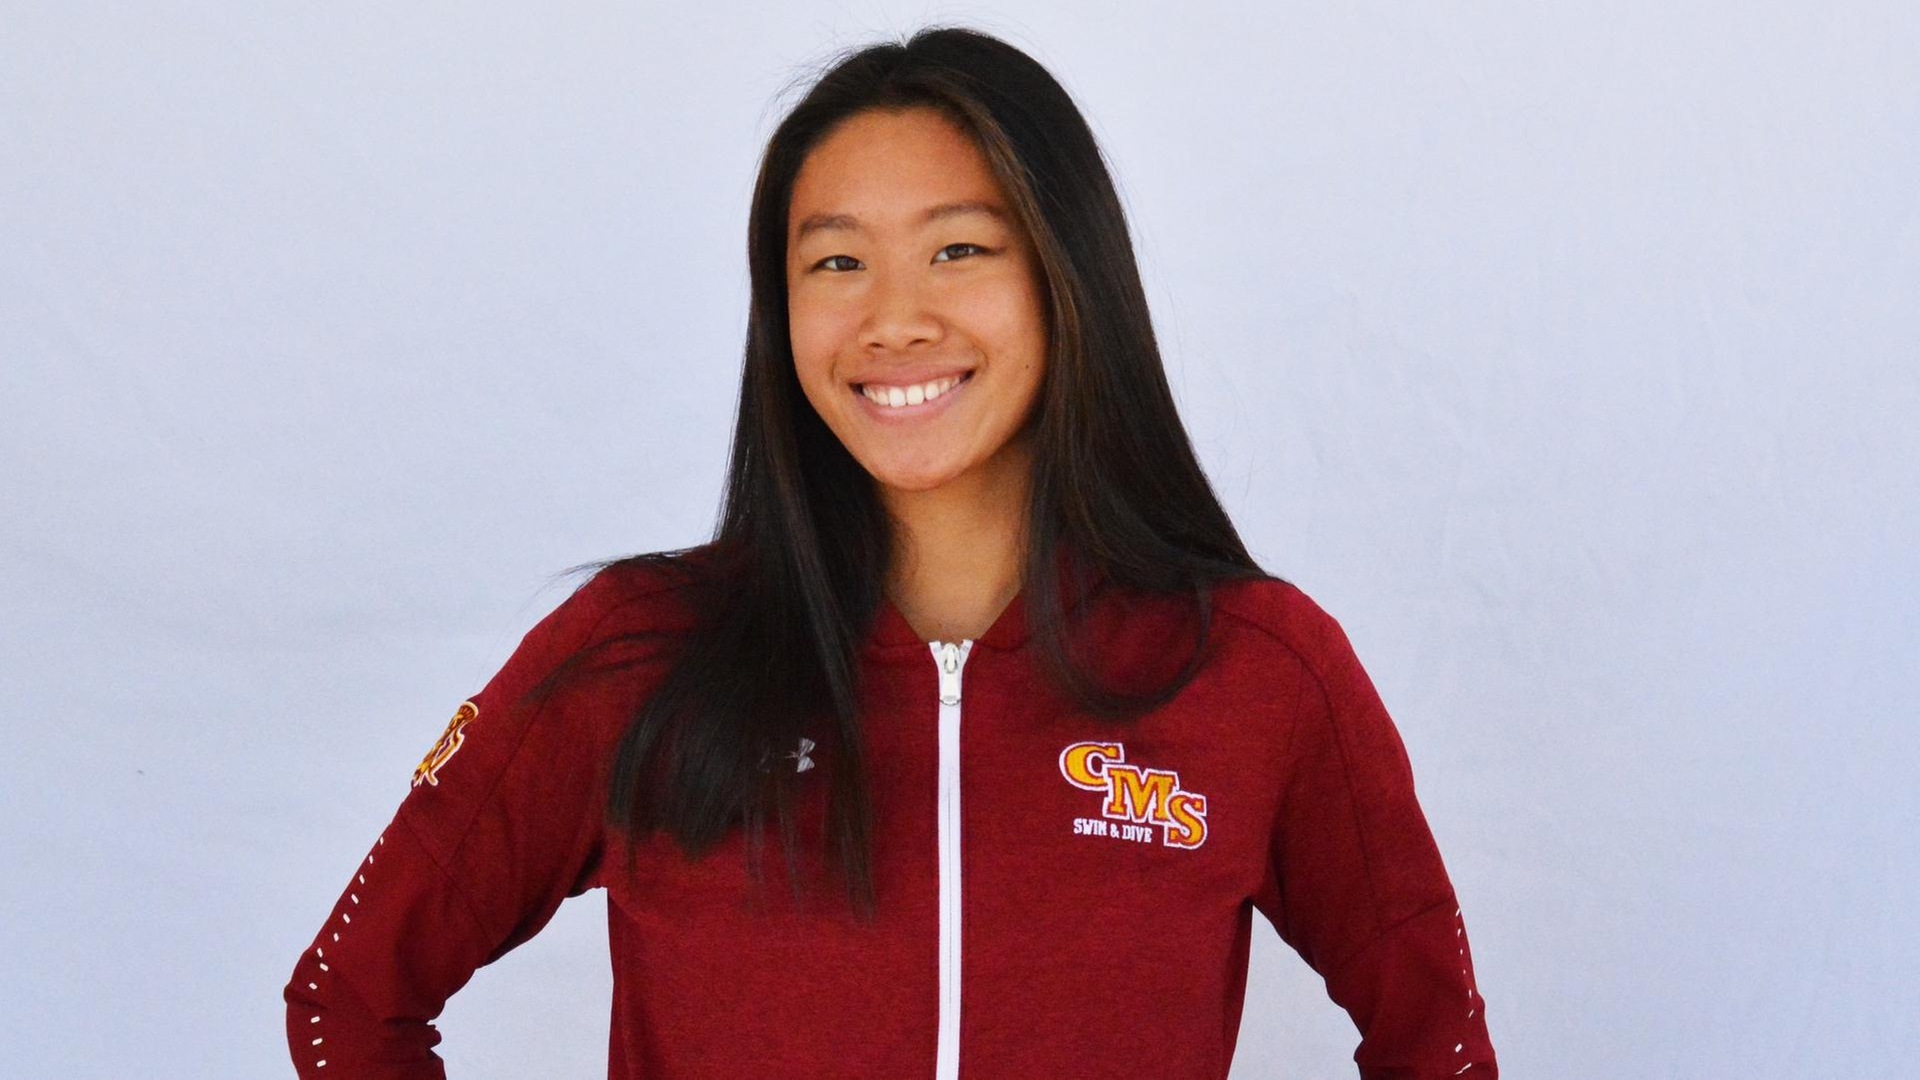 Kelly Prawira won the 200 breast in the No. 6 time in CMS history